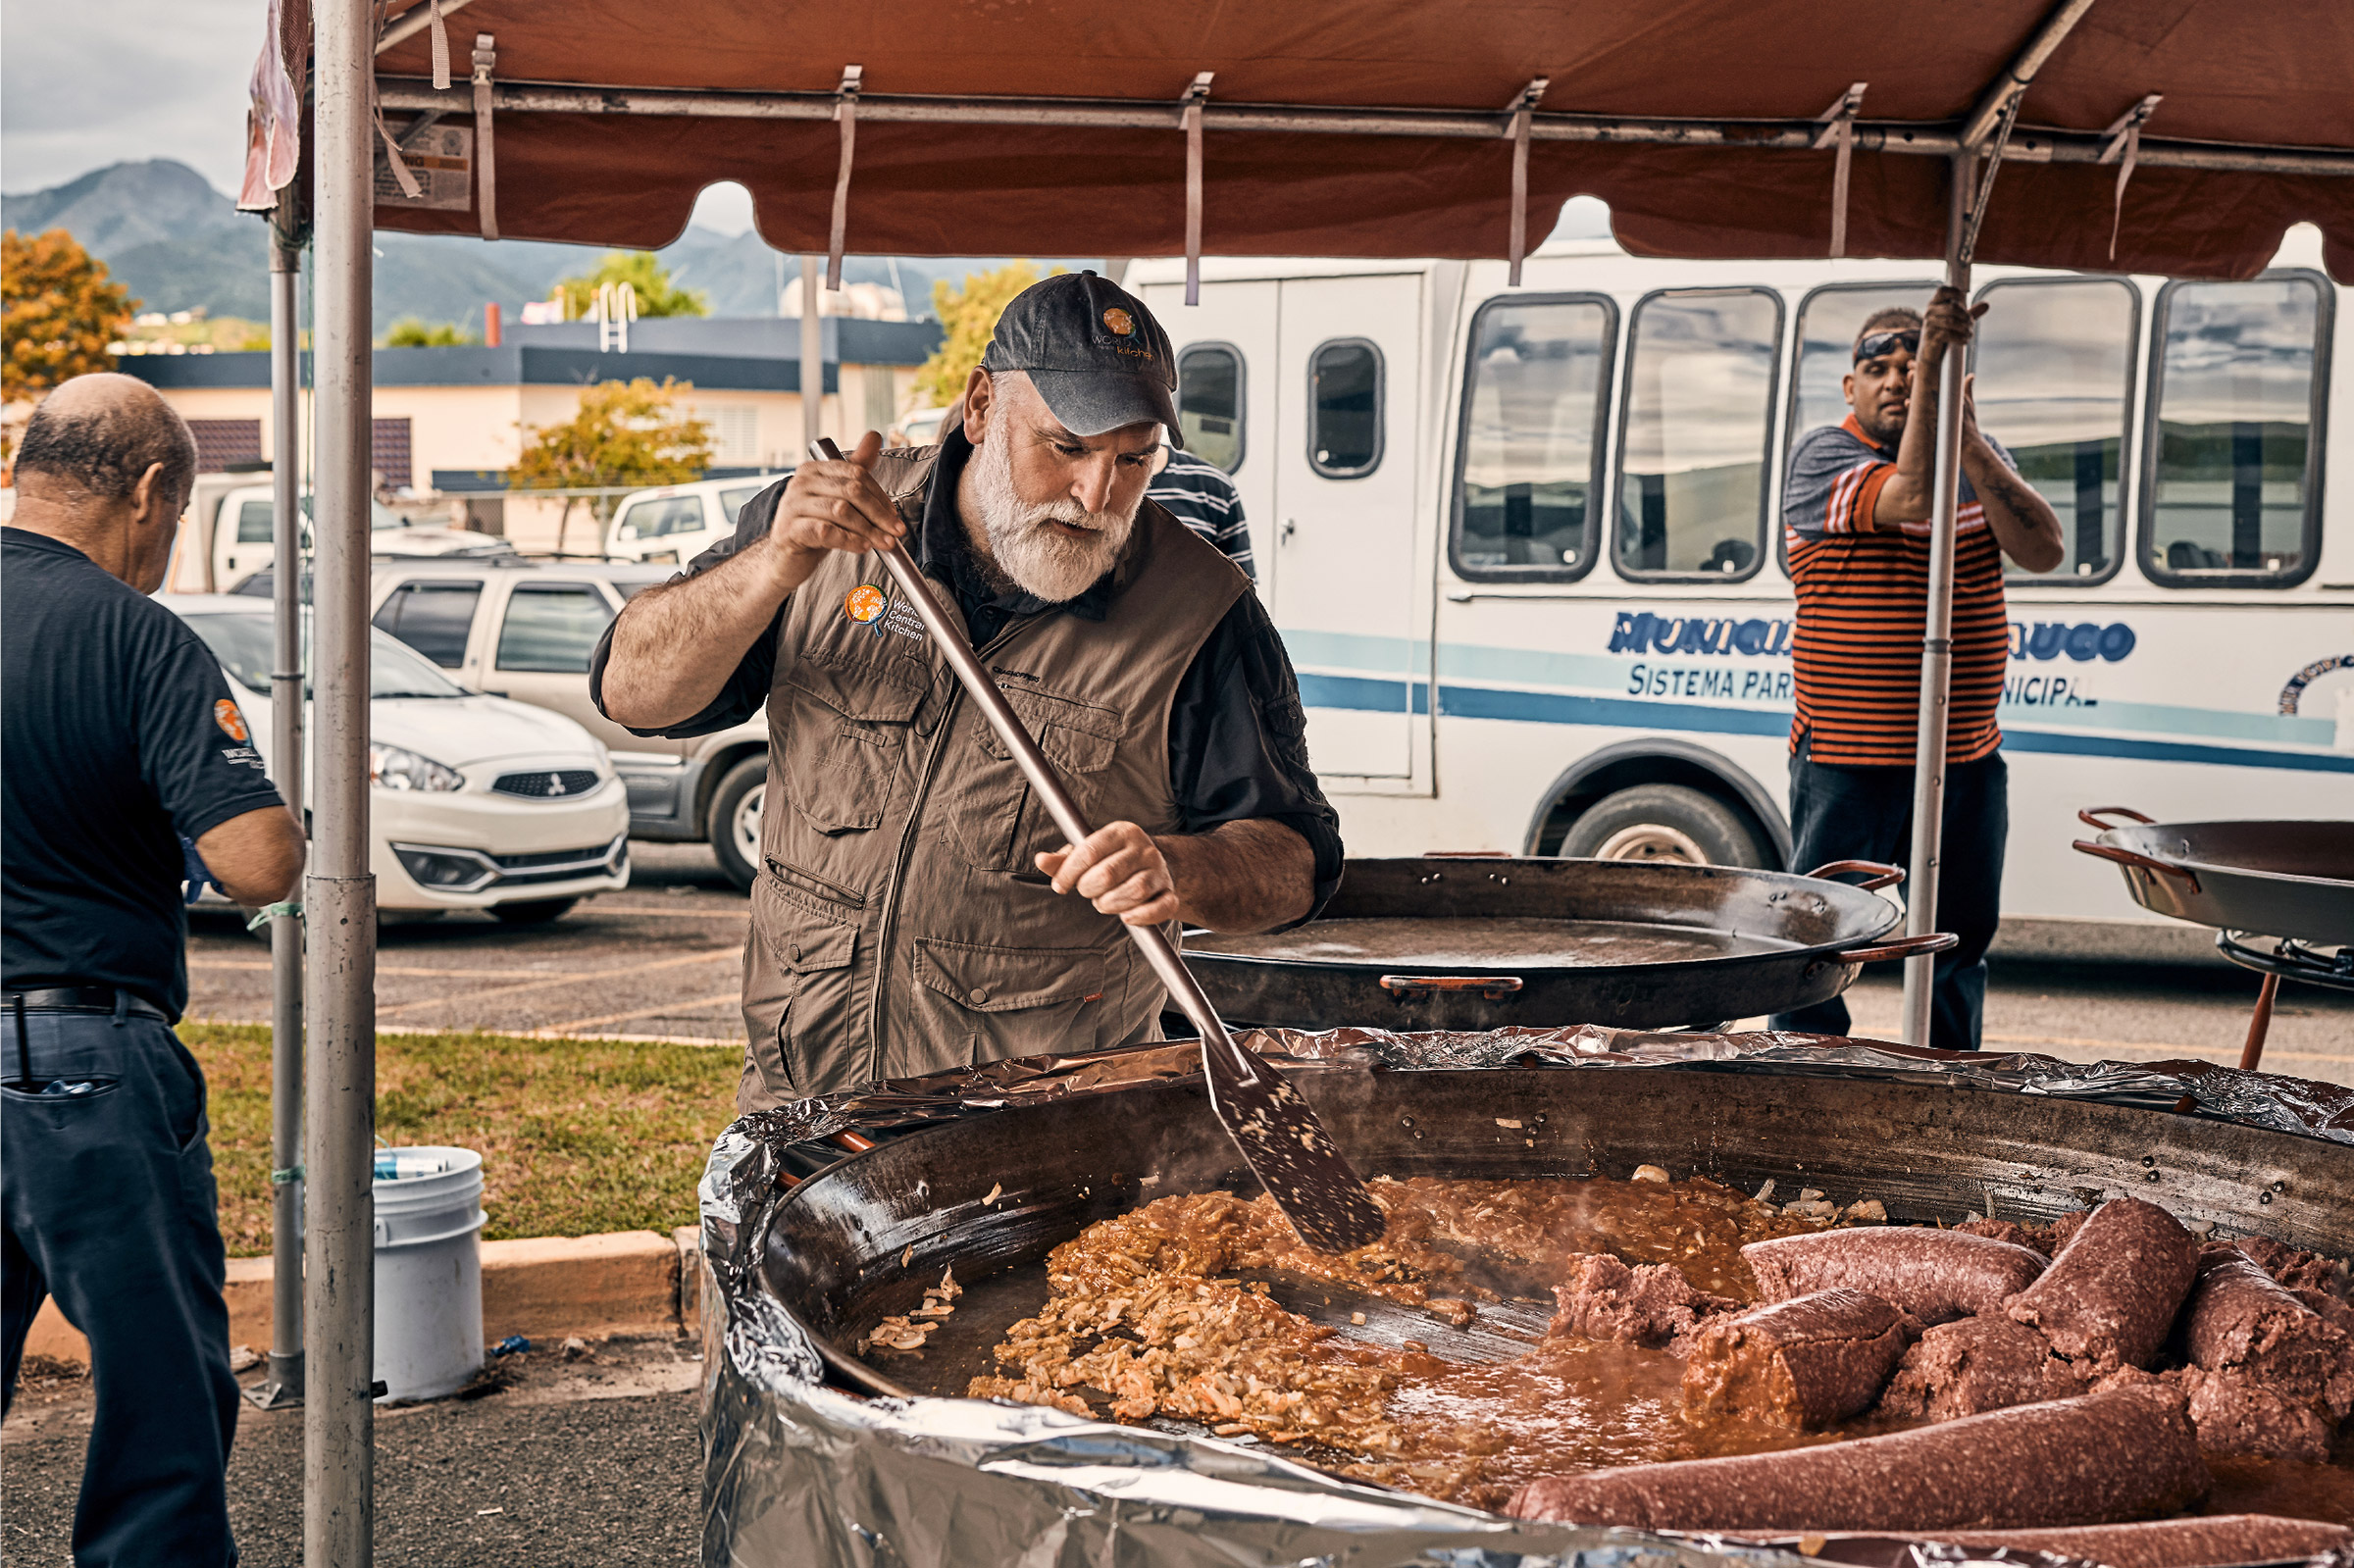 In January, Andrés stirs a pan in Puerto Rico after an earthquake (Christopher Gregory-Rivera for TIME)